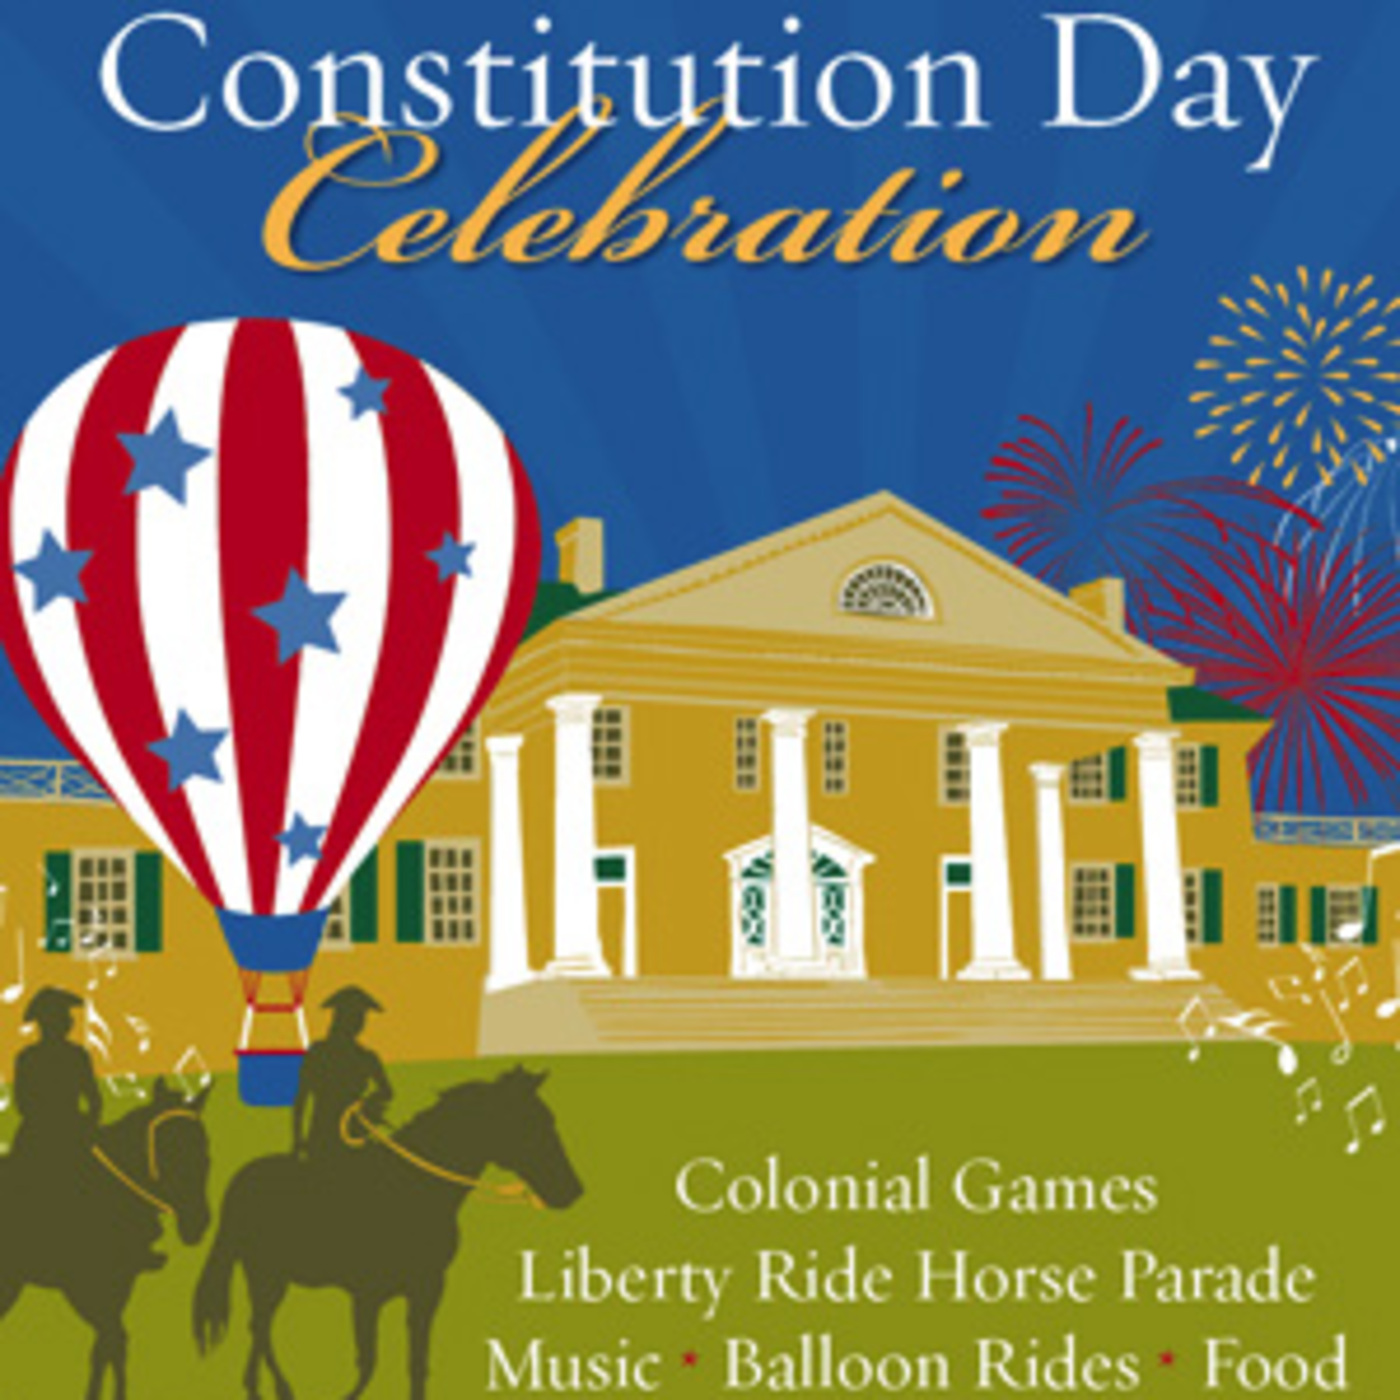 Constitution Day, 2017!